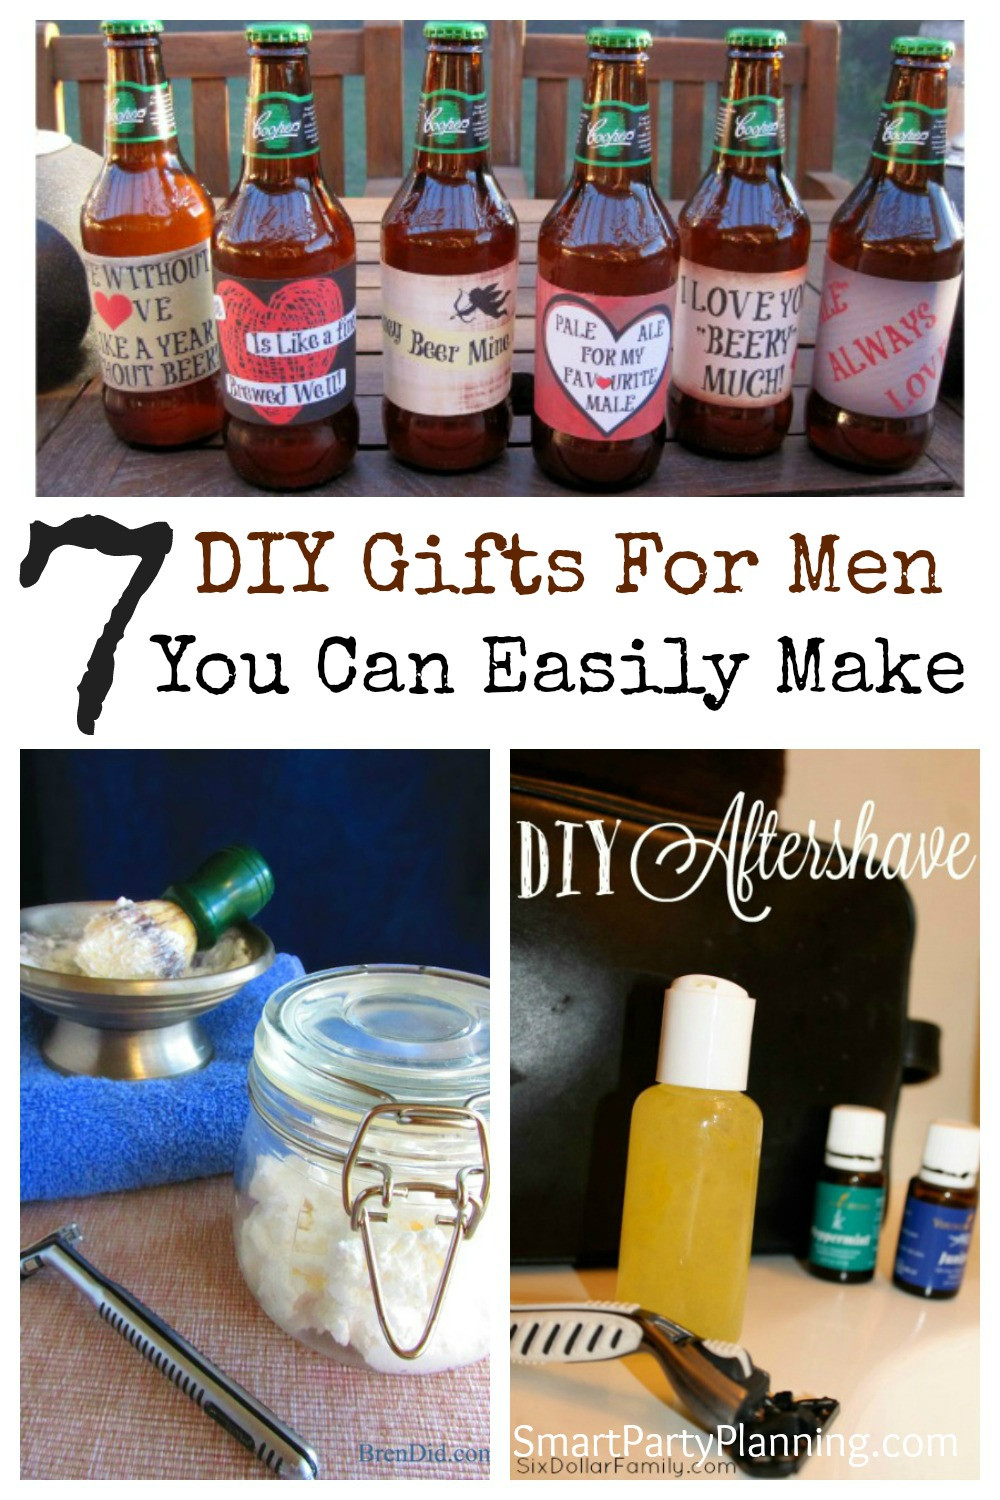 Valentine'S Day Gift Ideas For Men
 7 DIY Gifts For Men You Can Easily Make